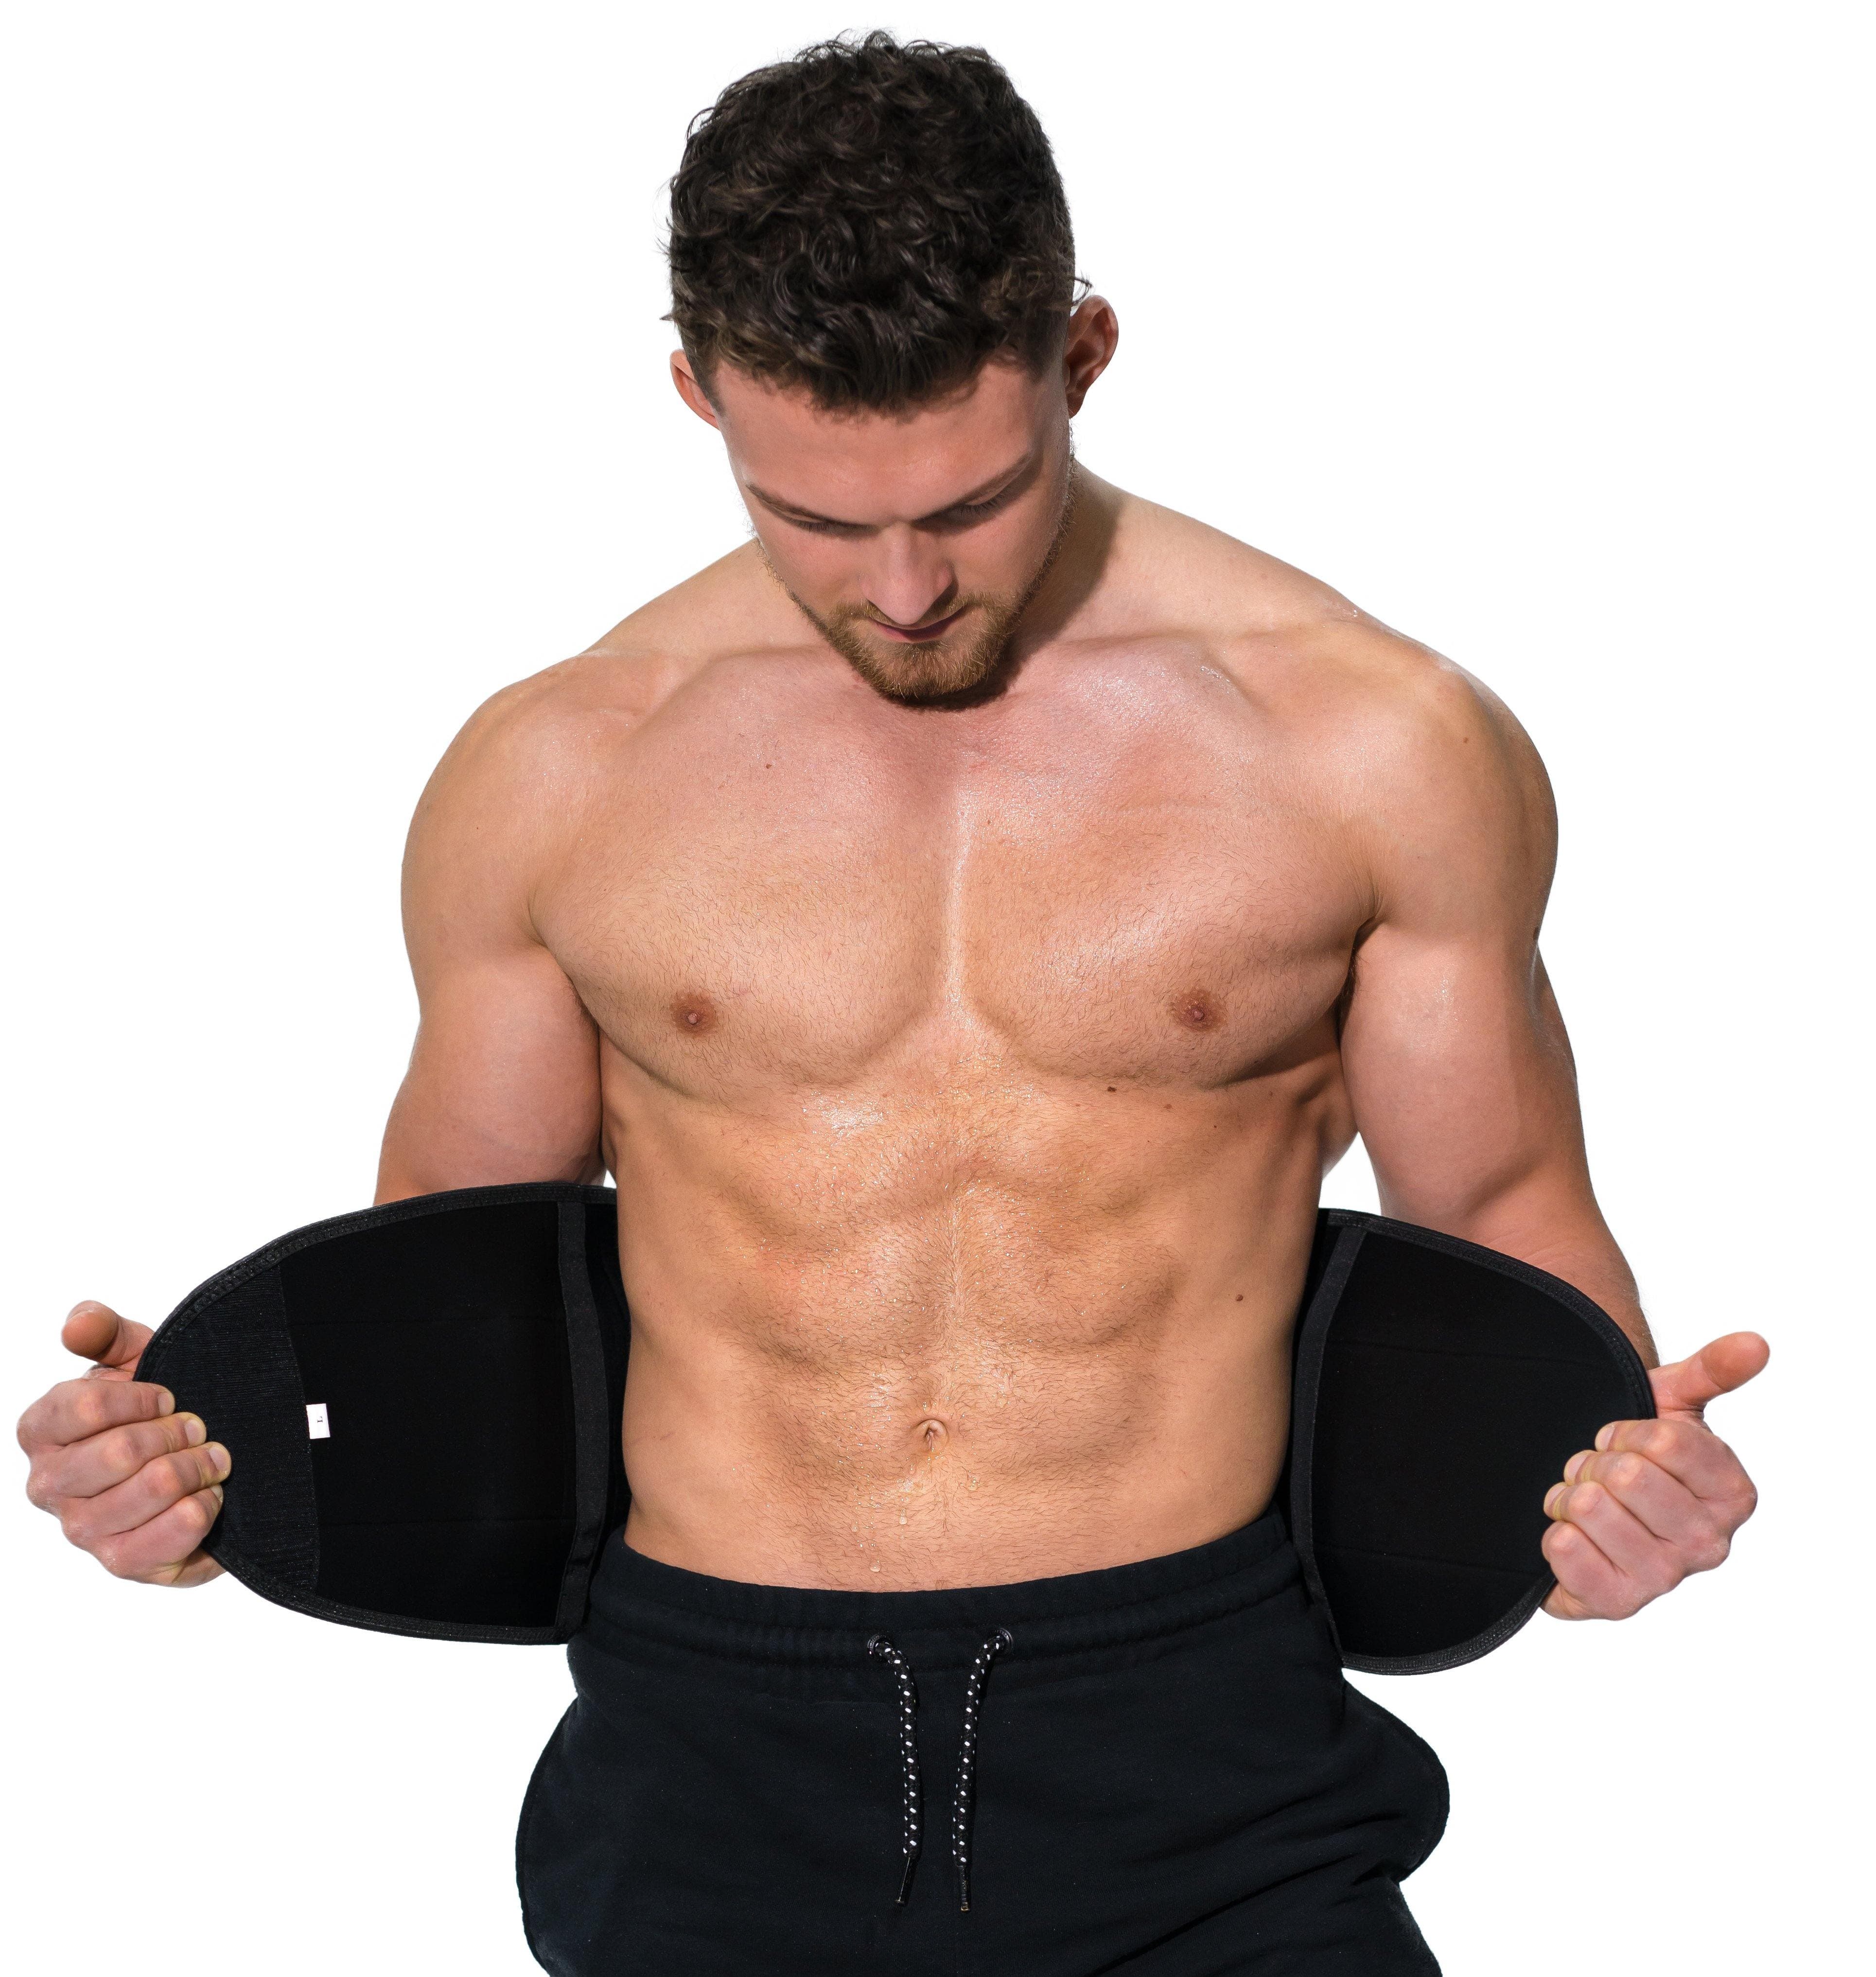 Man modeling the Redge Fit Full Body Starter Pack Sweat Belt Available at https://www.getredge.com/products/copy-of-full-body--all-in-one-pack